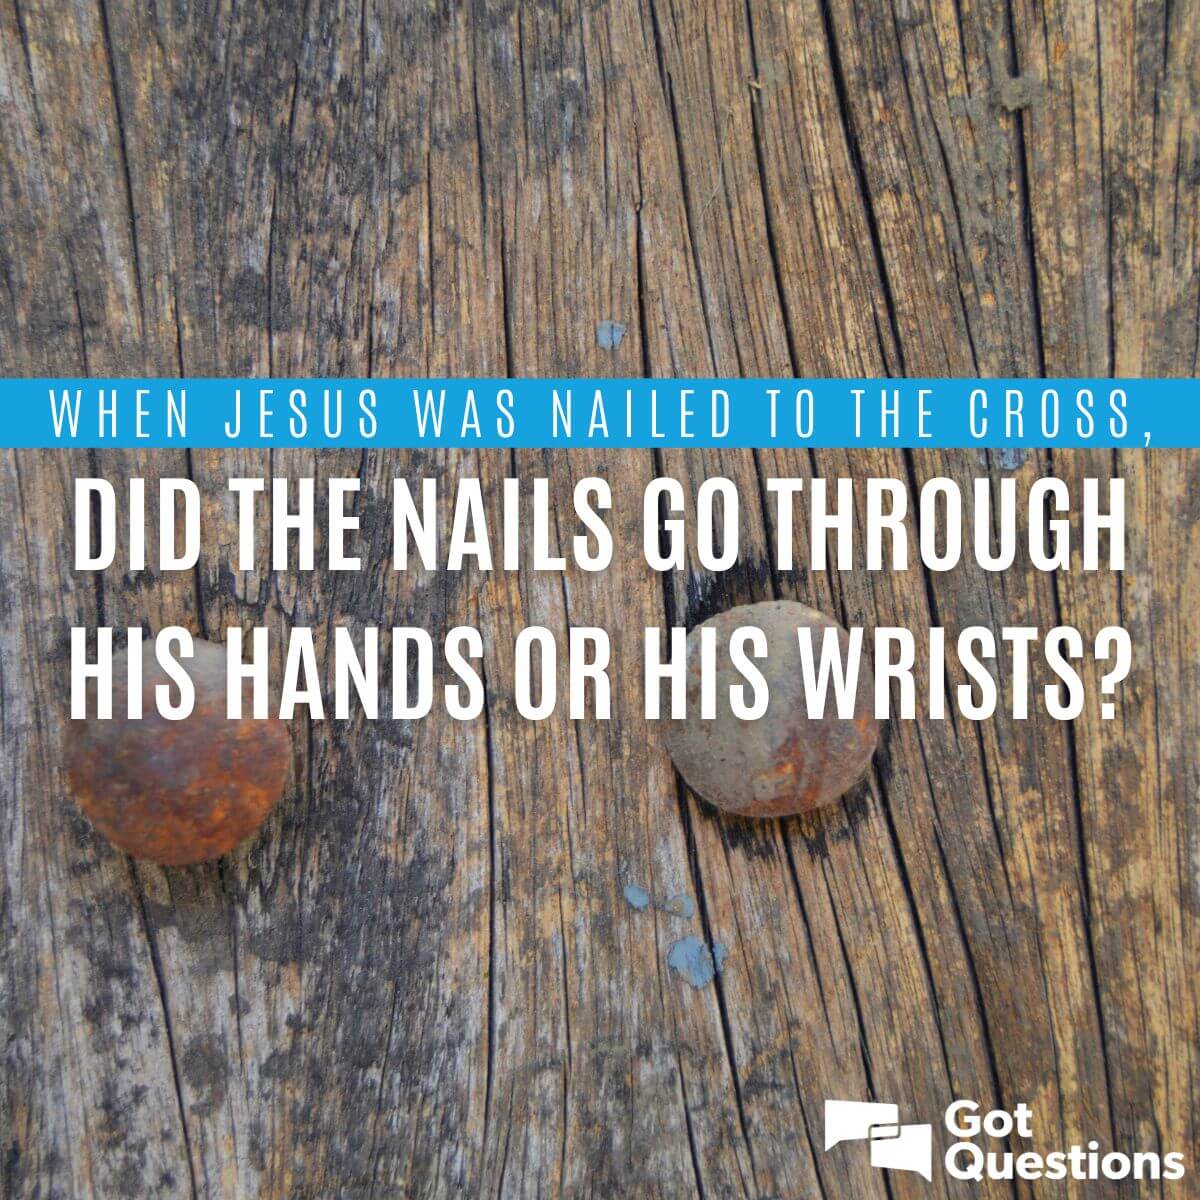 When Jesus was nailed to the cross, did the nails go through His hands